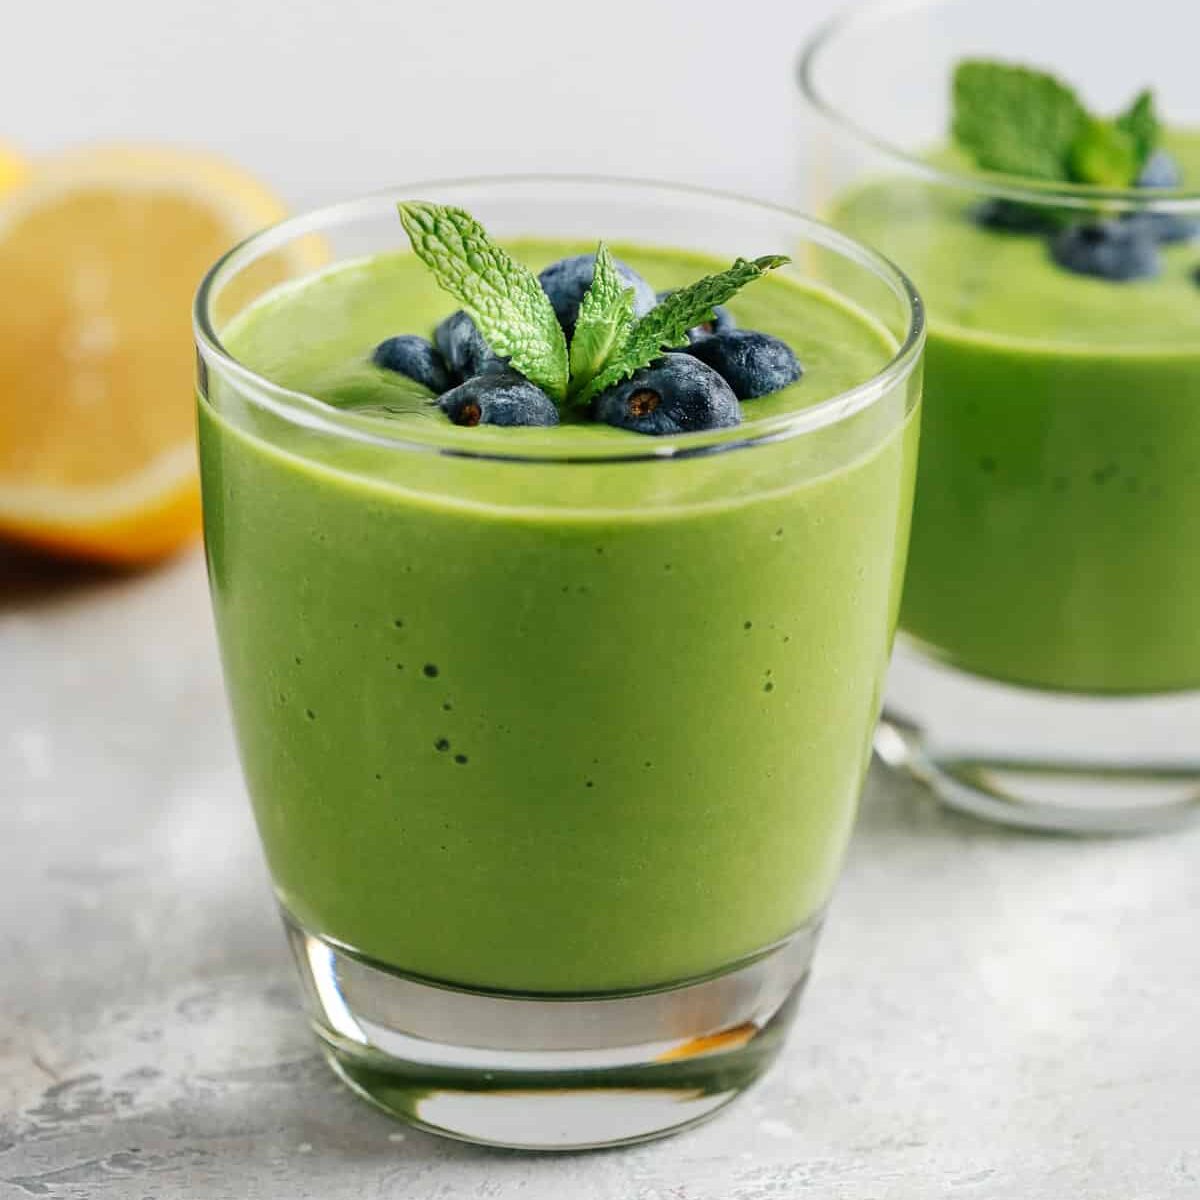 Low-carb green smoothie topped with blueberries.